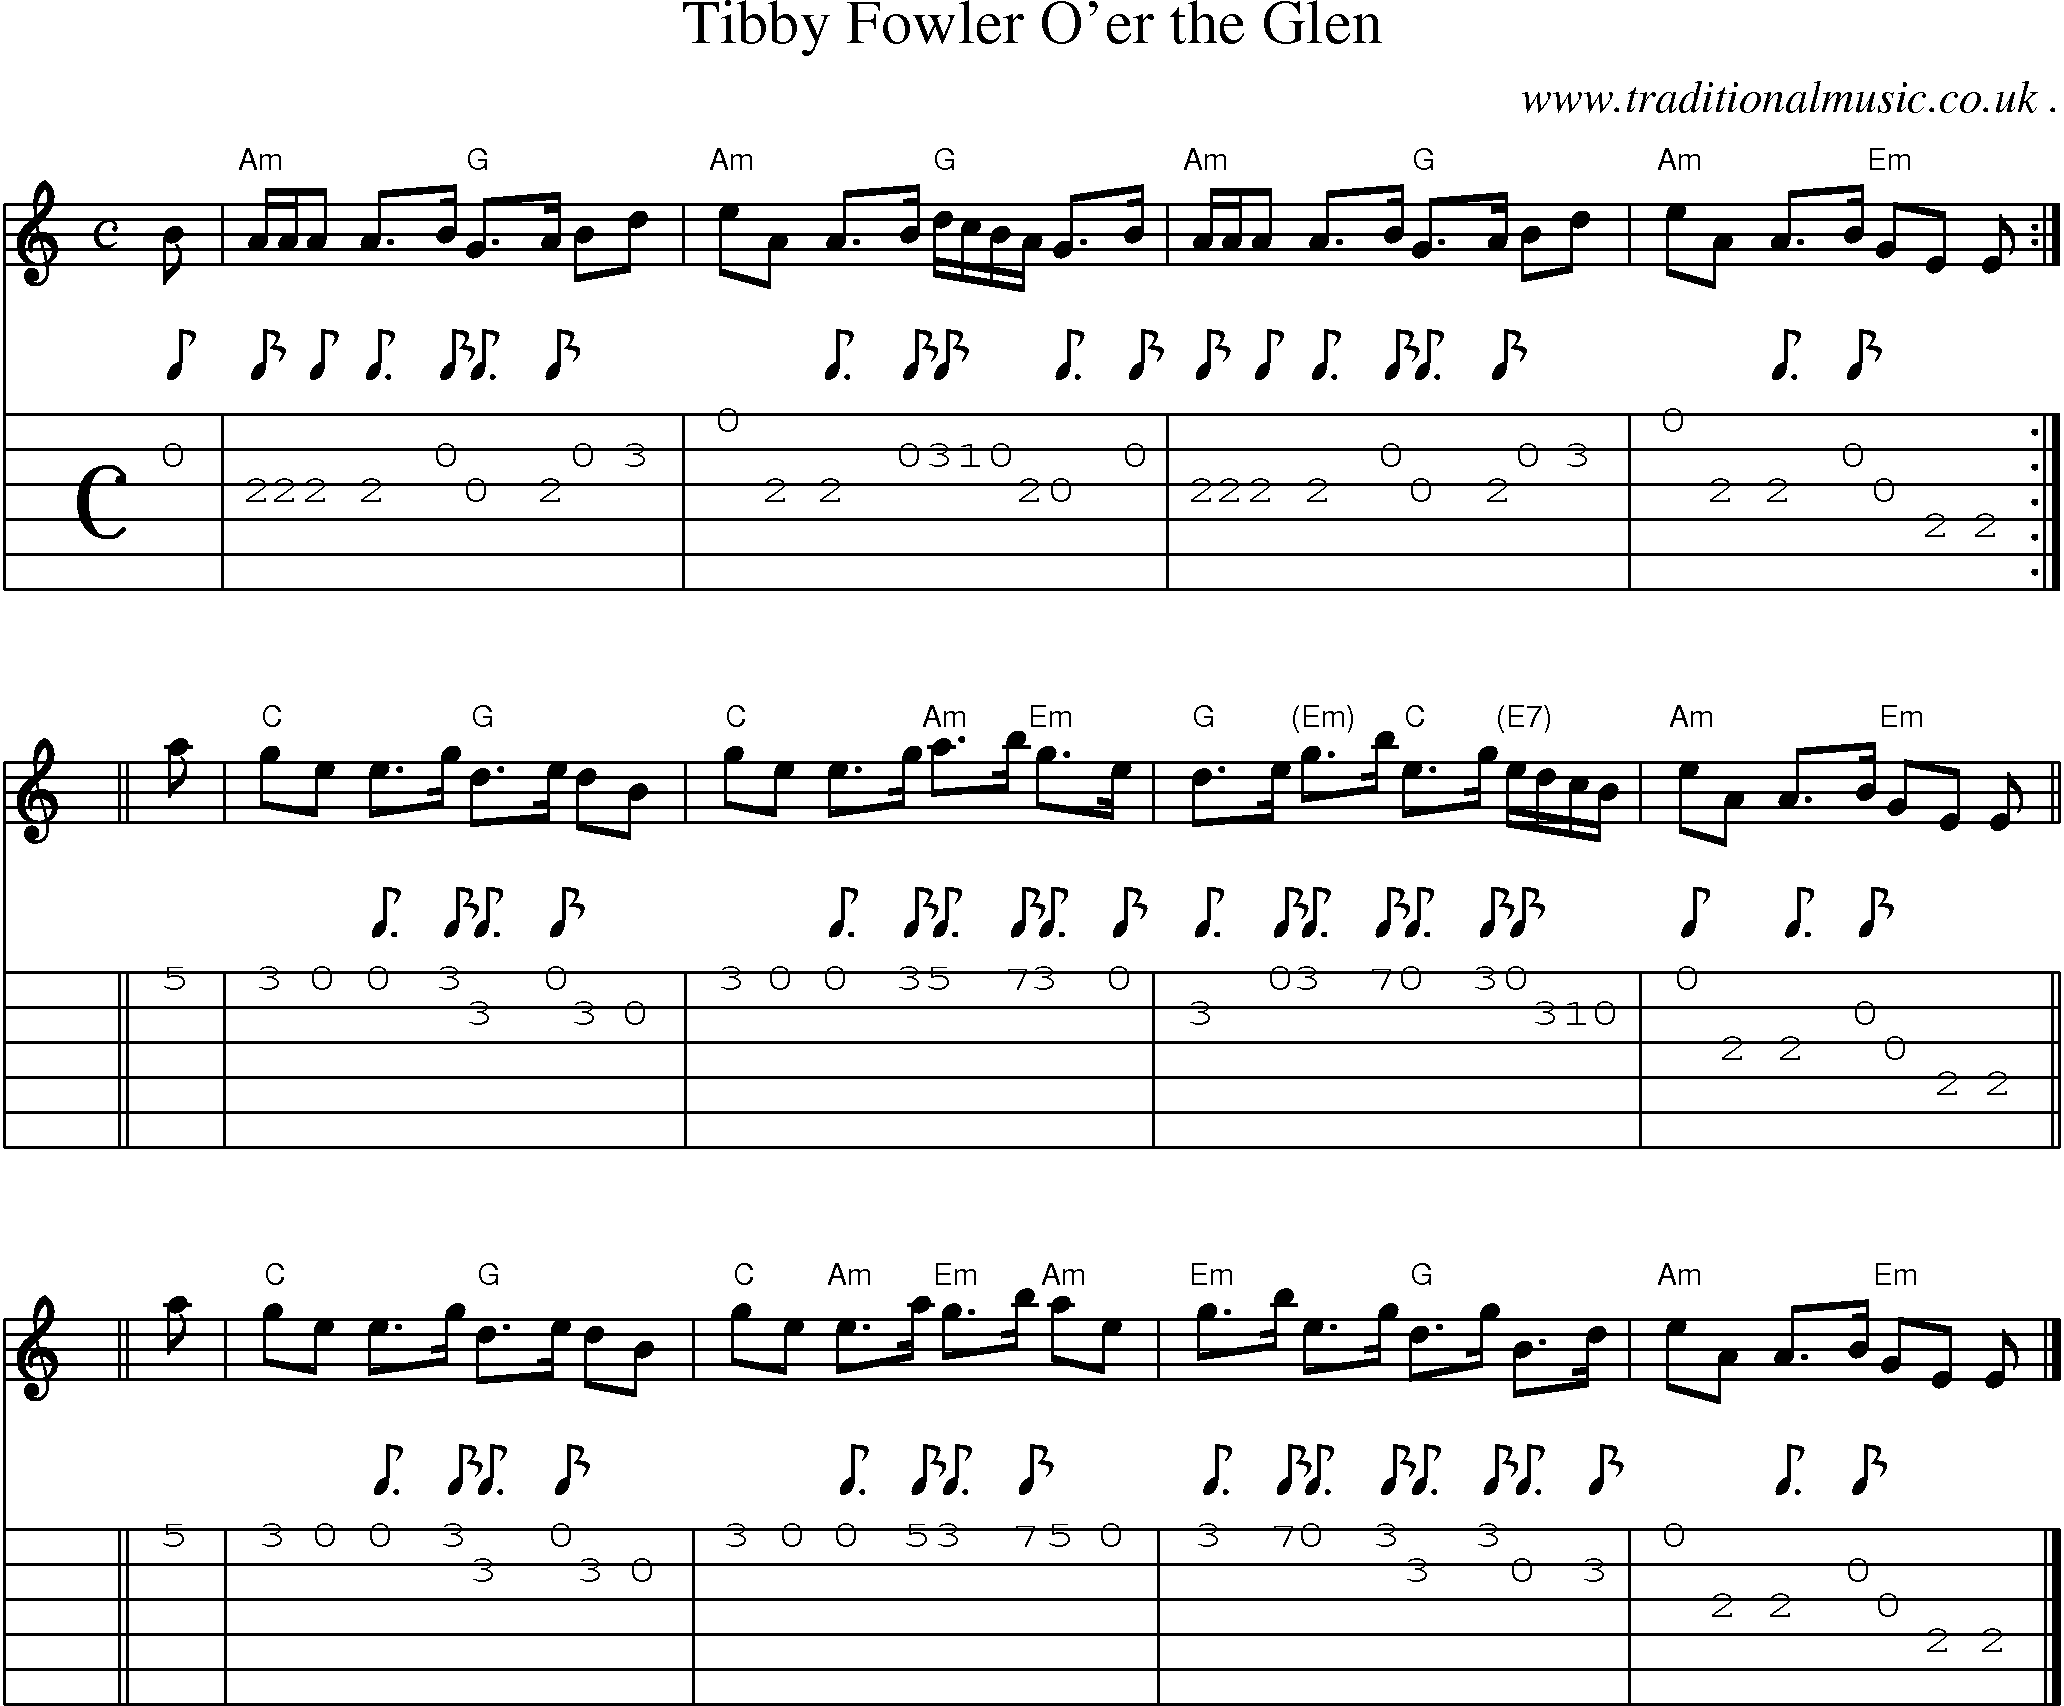 Sheet-music  score, Chords and Guitar Tabs for Tibby Fowler Oer The Glen